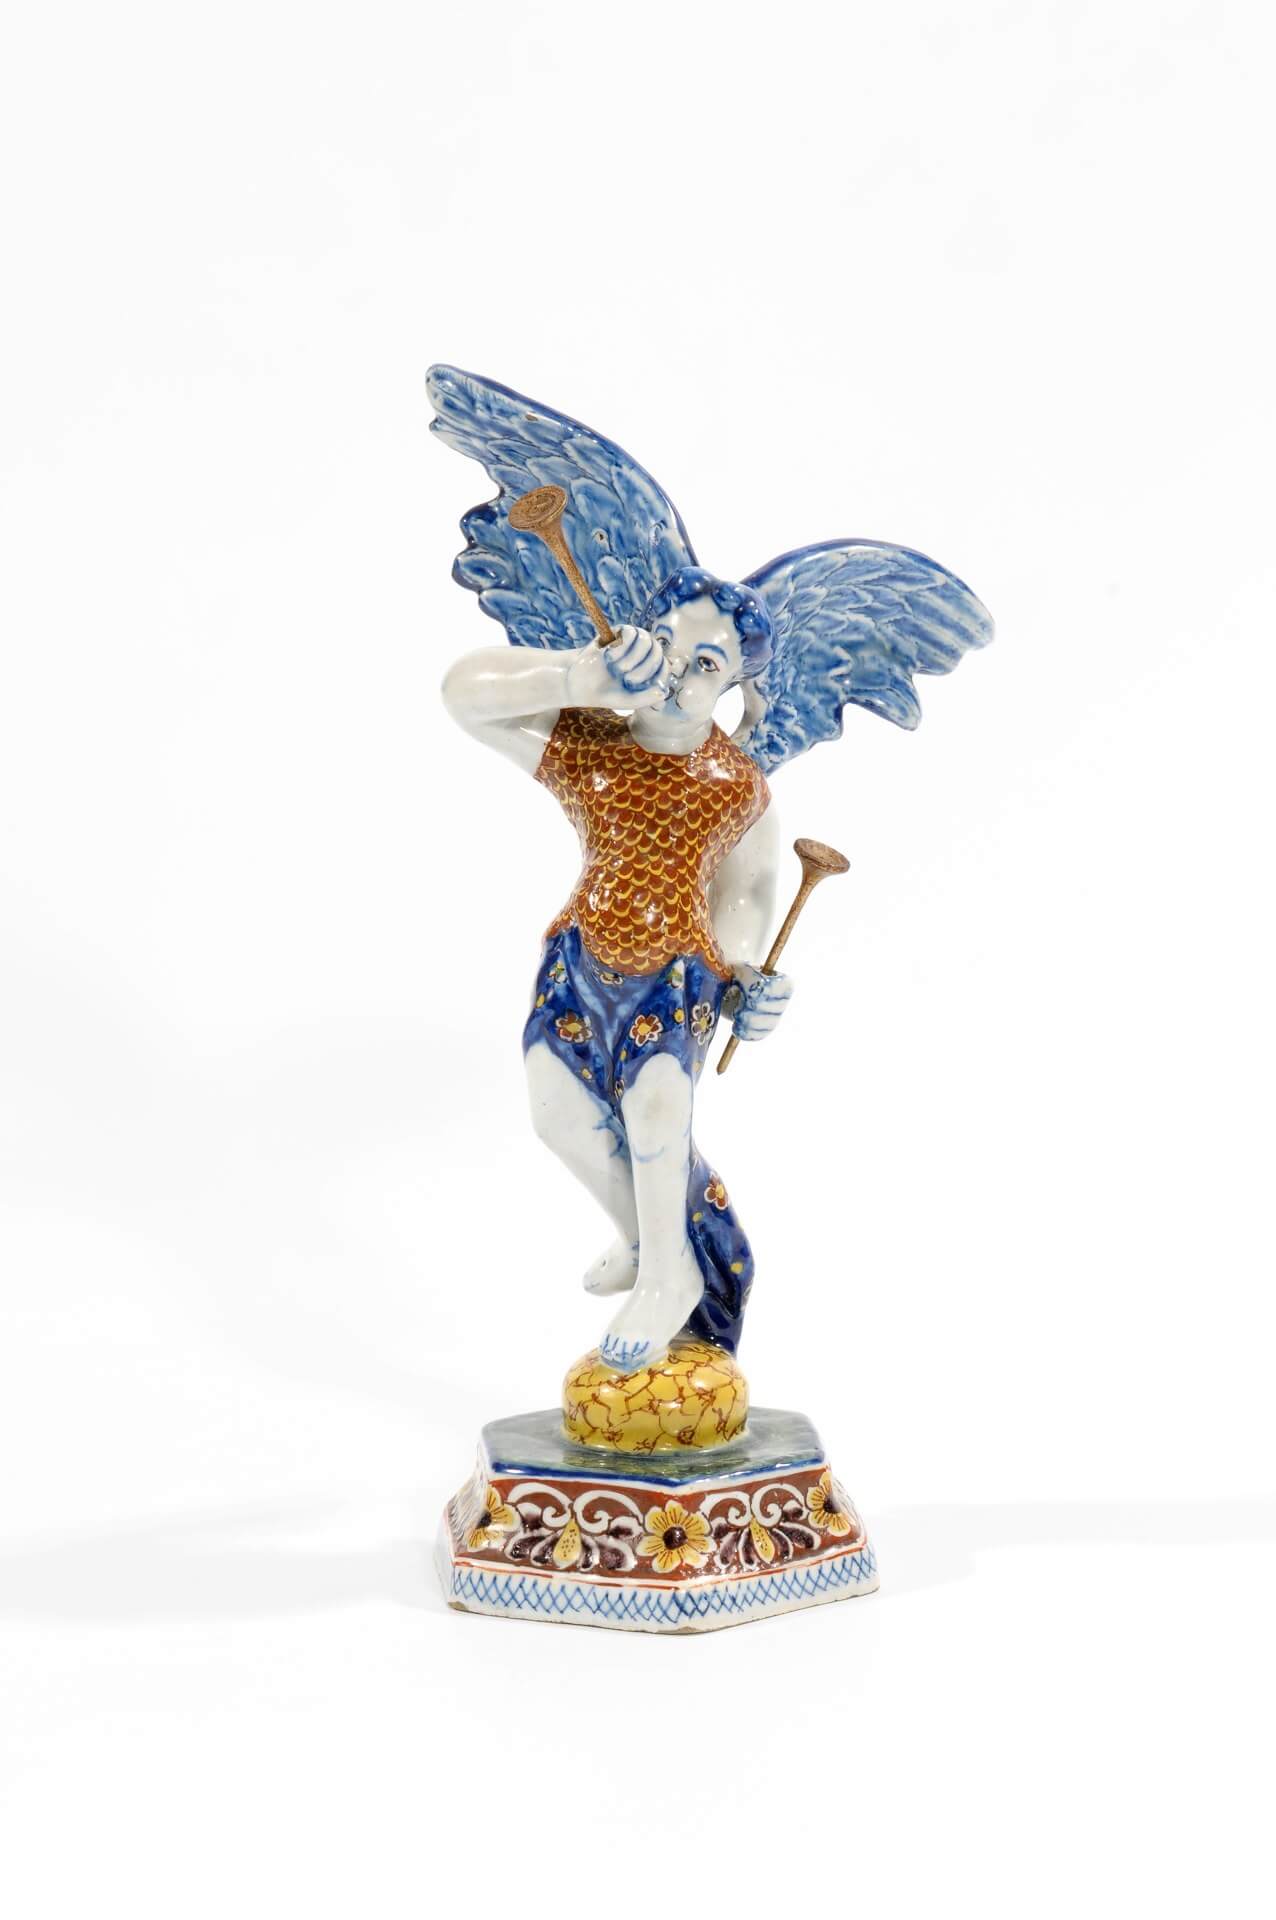 Delft pottery of polychrome allegorical figure of fame